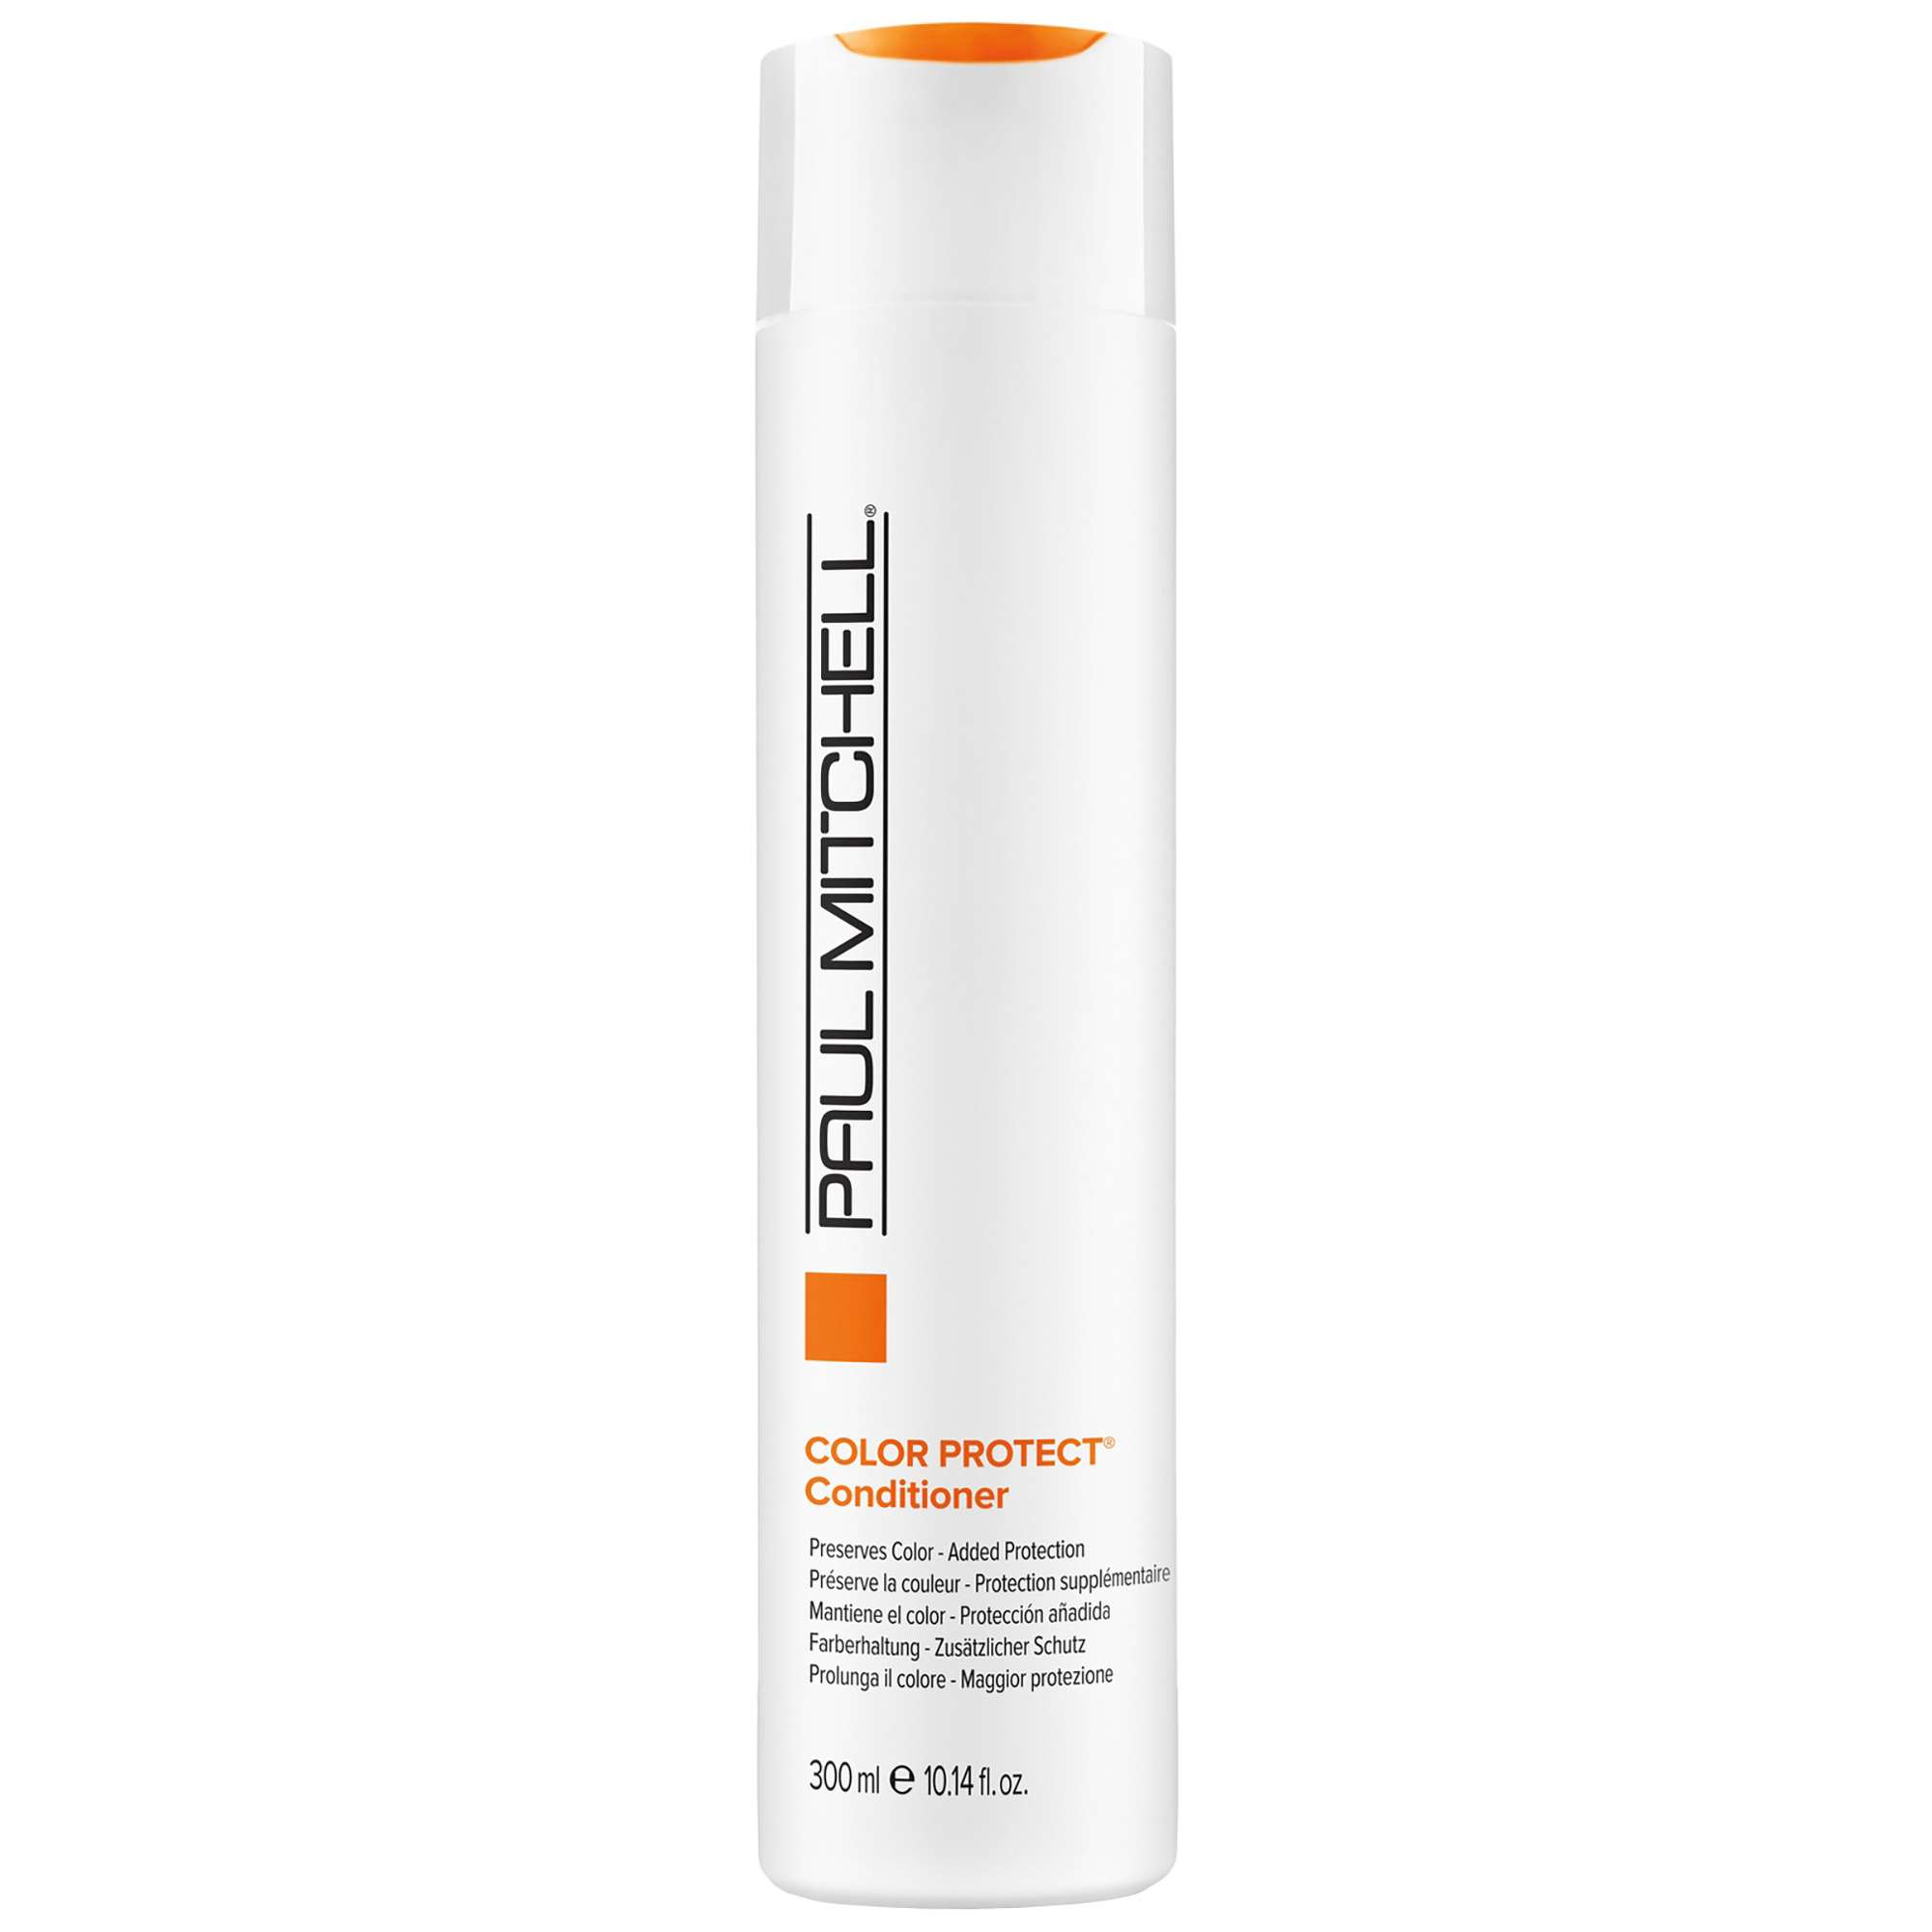 Image of Paul Mitchell Color Protect Conditioner 300ml